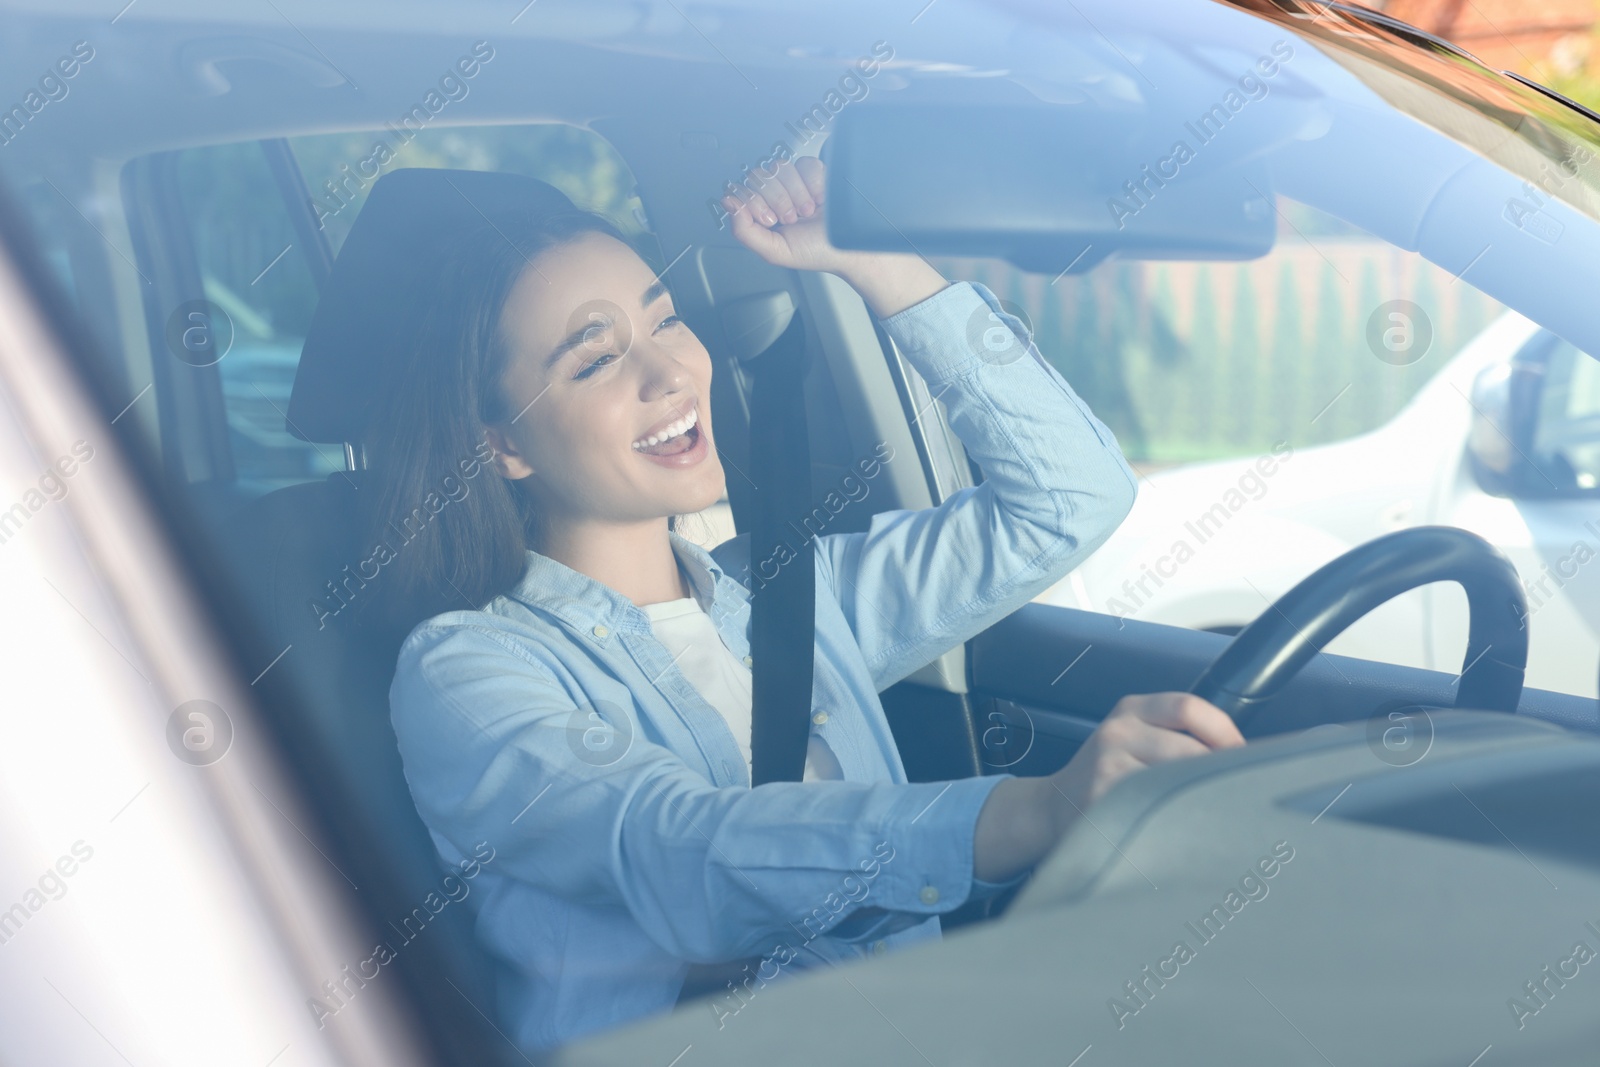 Photo of Listening to radio while driving. Emotional young woman enjoying music in car, view through windshield